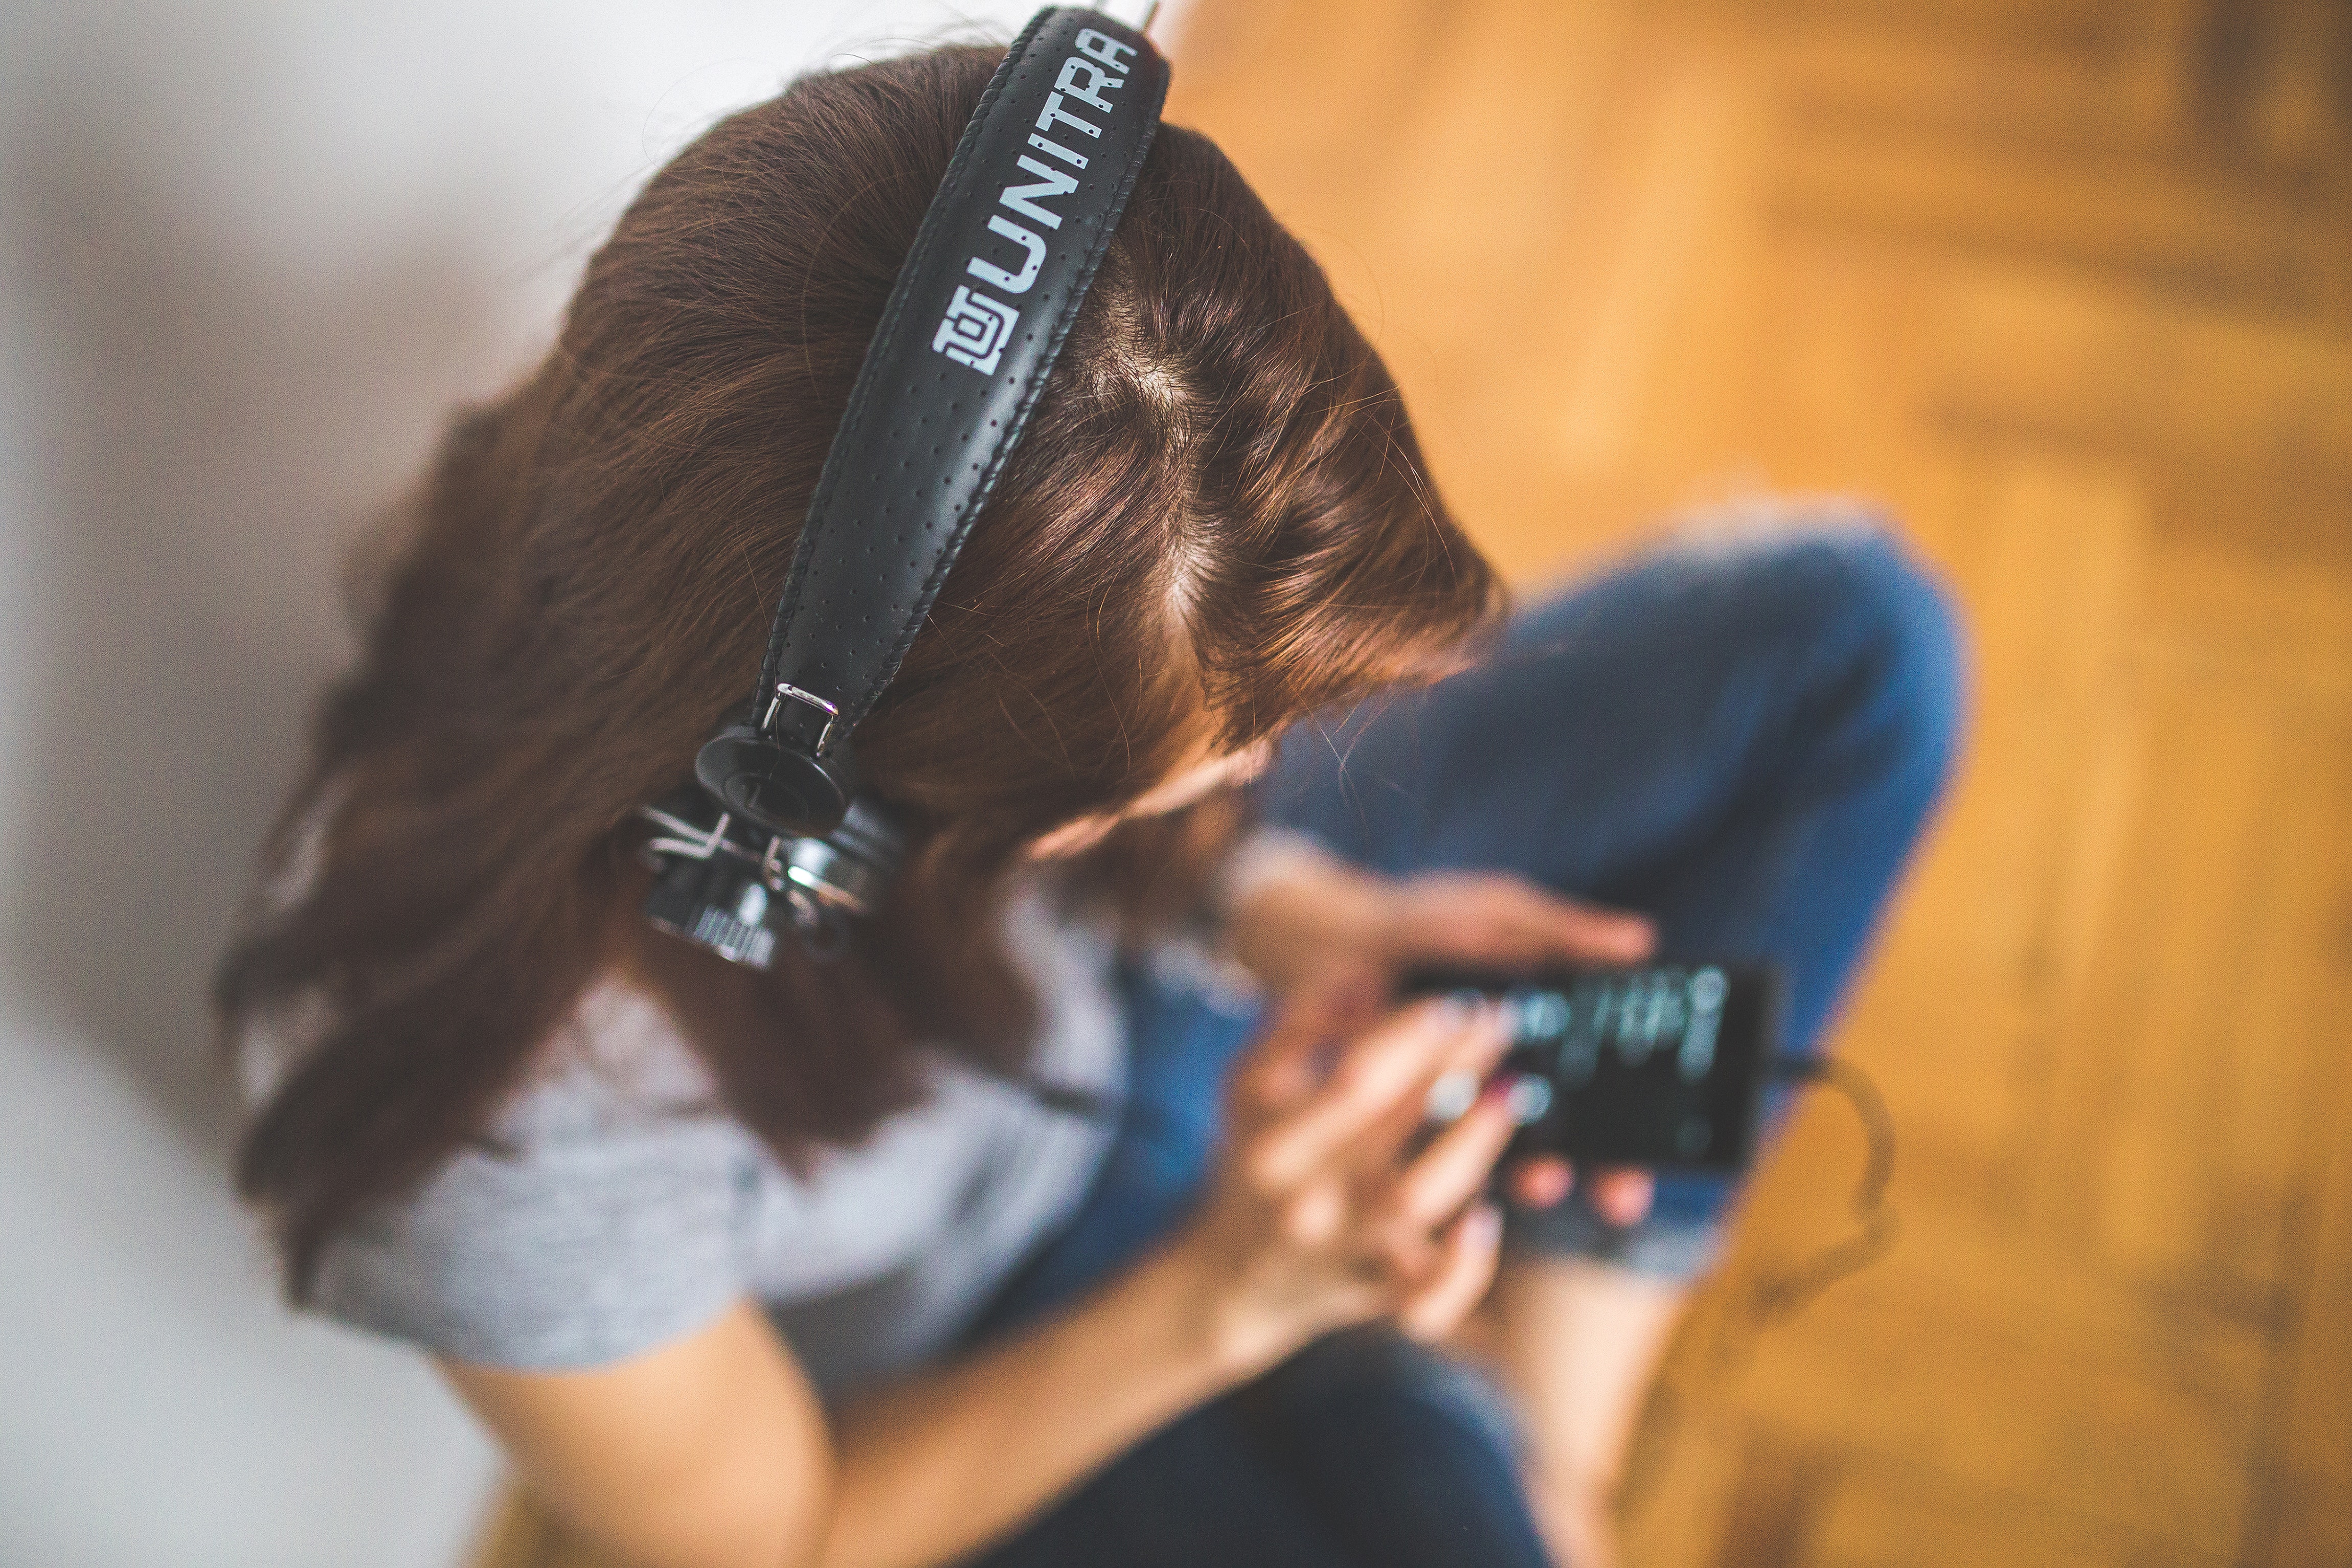 Music consumer report: music remains integral to our lives, Australia ranks #12 in audio streaming take-up